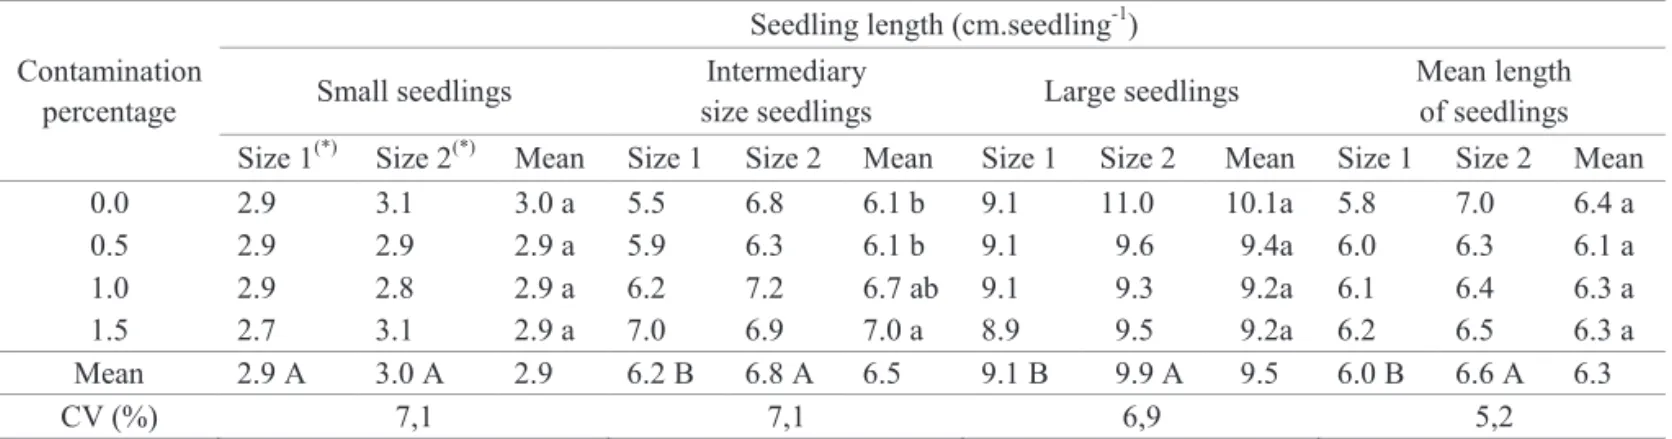 Table 4. Length of seedlings (small, intermediary, and large) and mean length of seedlings of the non-GM soybean cultivar  BRSMG  810C  (sensitive  to  glyphosate)  using  pre-imbibition  of  seeds  on  paper  towels  moistened  with  the  herbicide, in fu